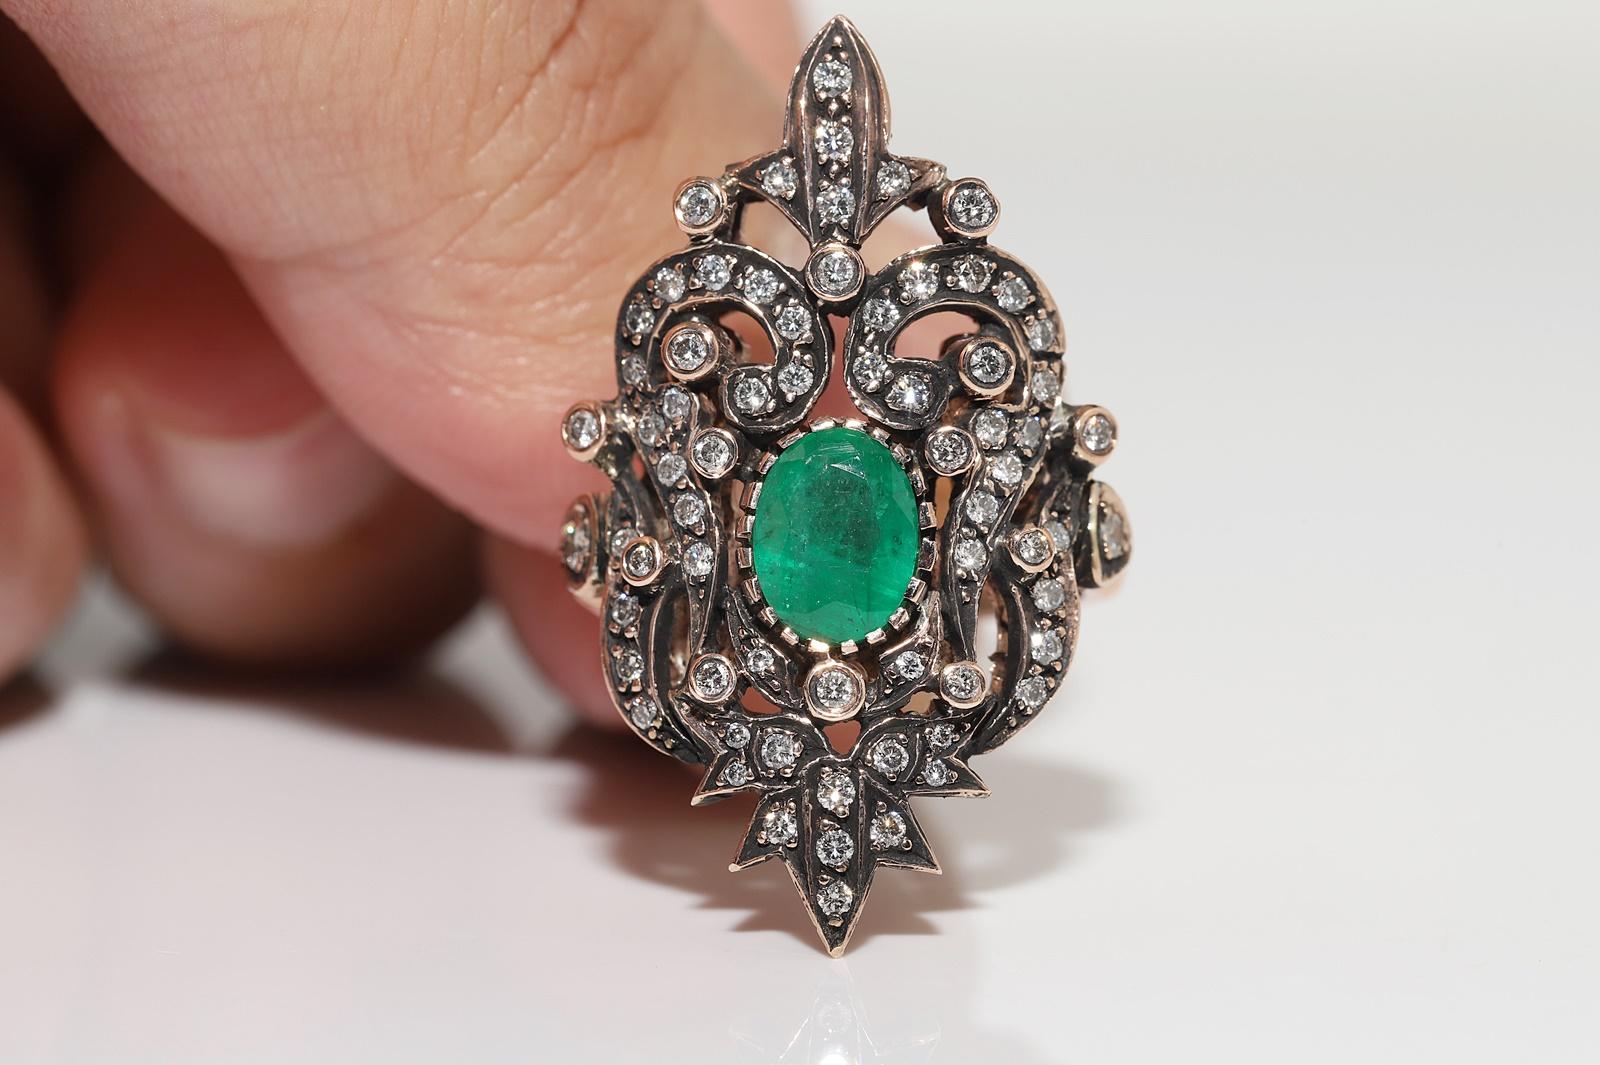 In very good condition.
Total weight is 8.4 grams.
Totally is diamond 1 ct.
The diamond is has G-H color and vvs-vs clarity.
Totally is emerald 1.10 ct.
Ring size is US 7.5 (We offer free resizing)
We can make any size.
Please contact for any